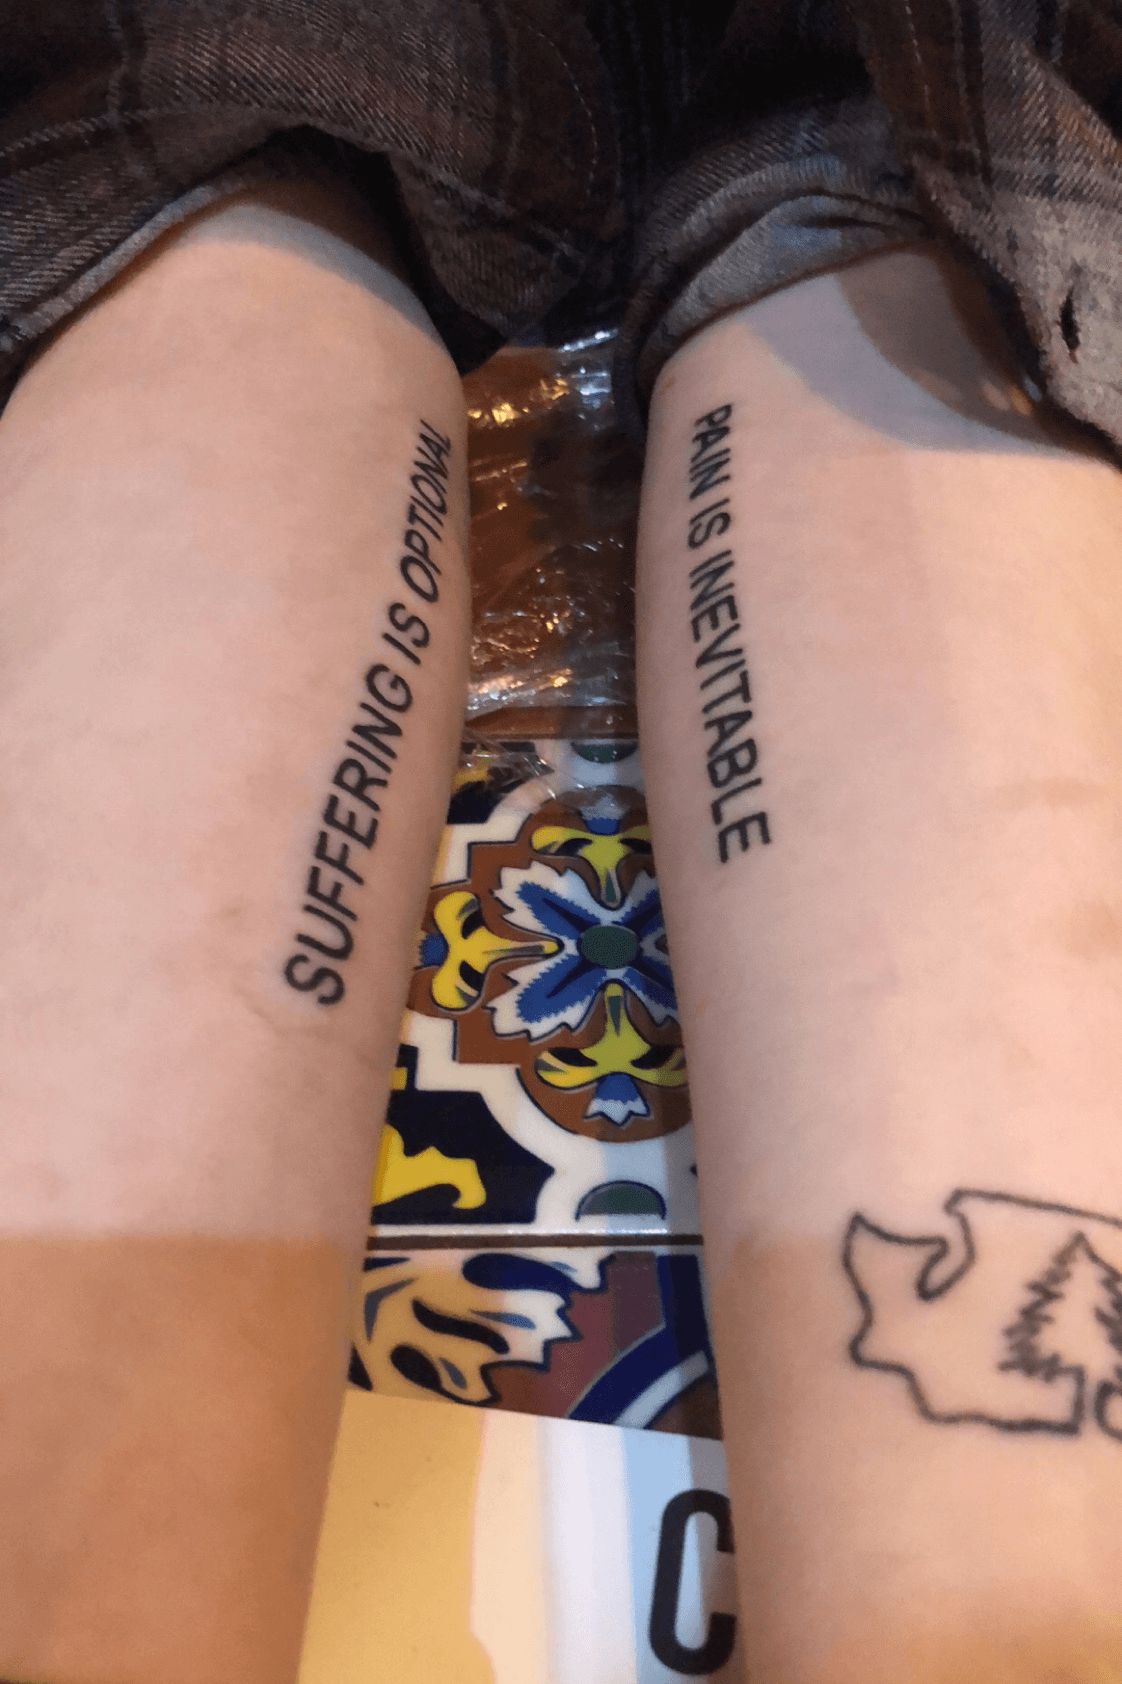 OC After surviving a suicide attempt in 2019 I promised myself these  tattoos finally had the courage to get them  rMadeMeSmile